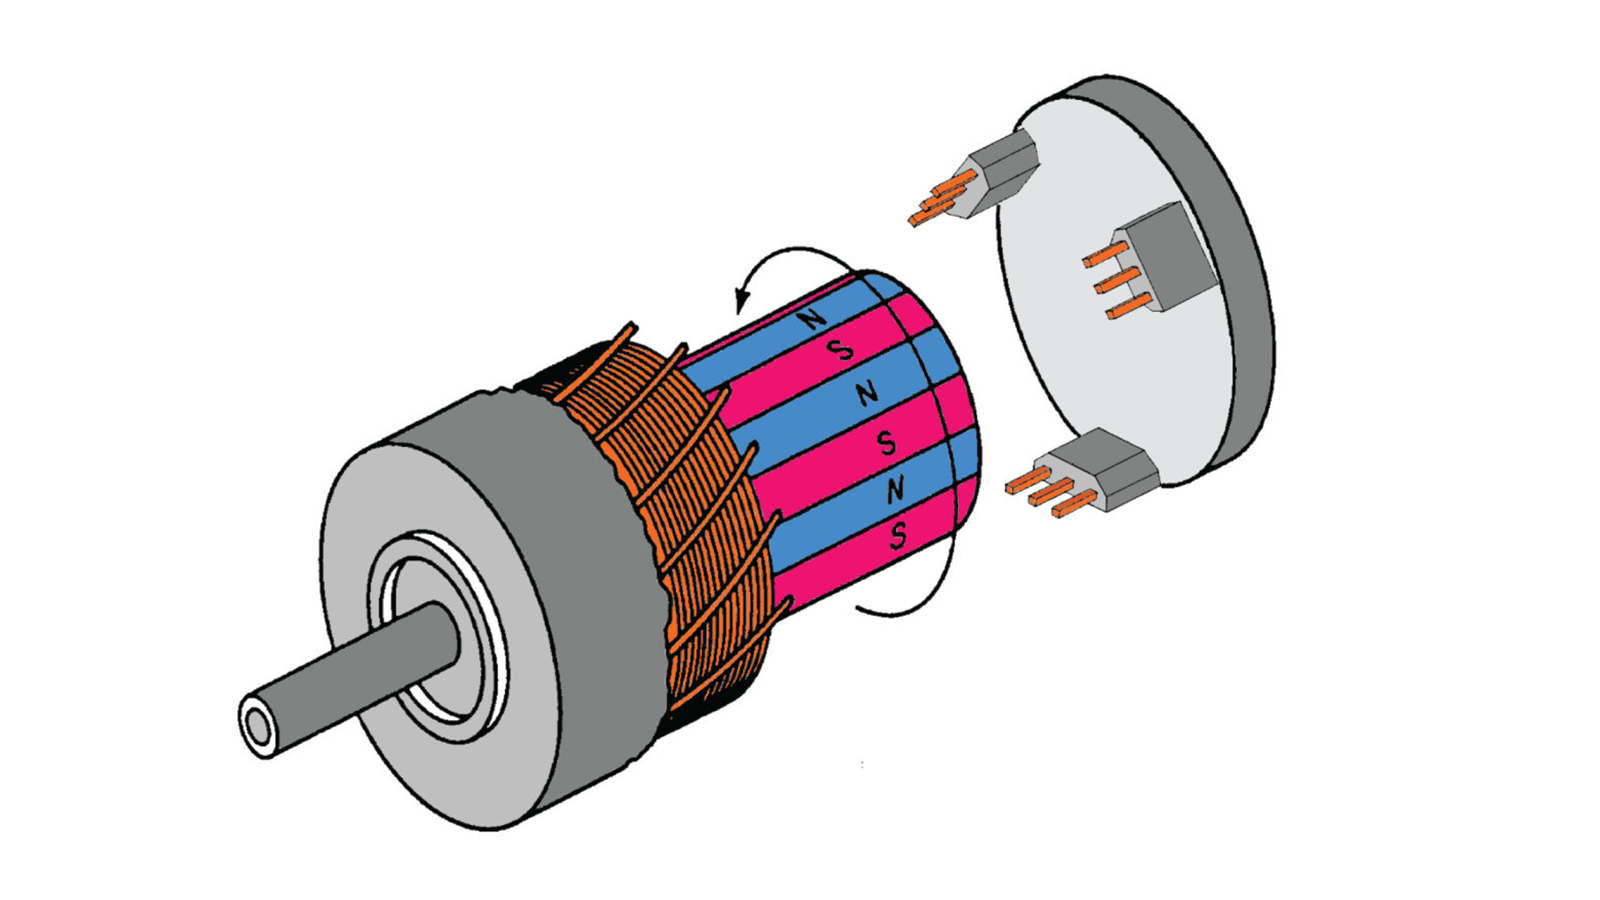 Analysis of Pole Pairs in Brushless Motors